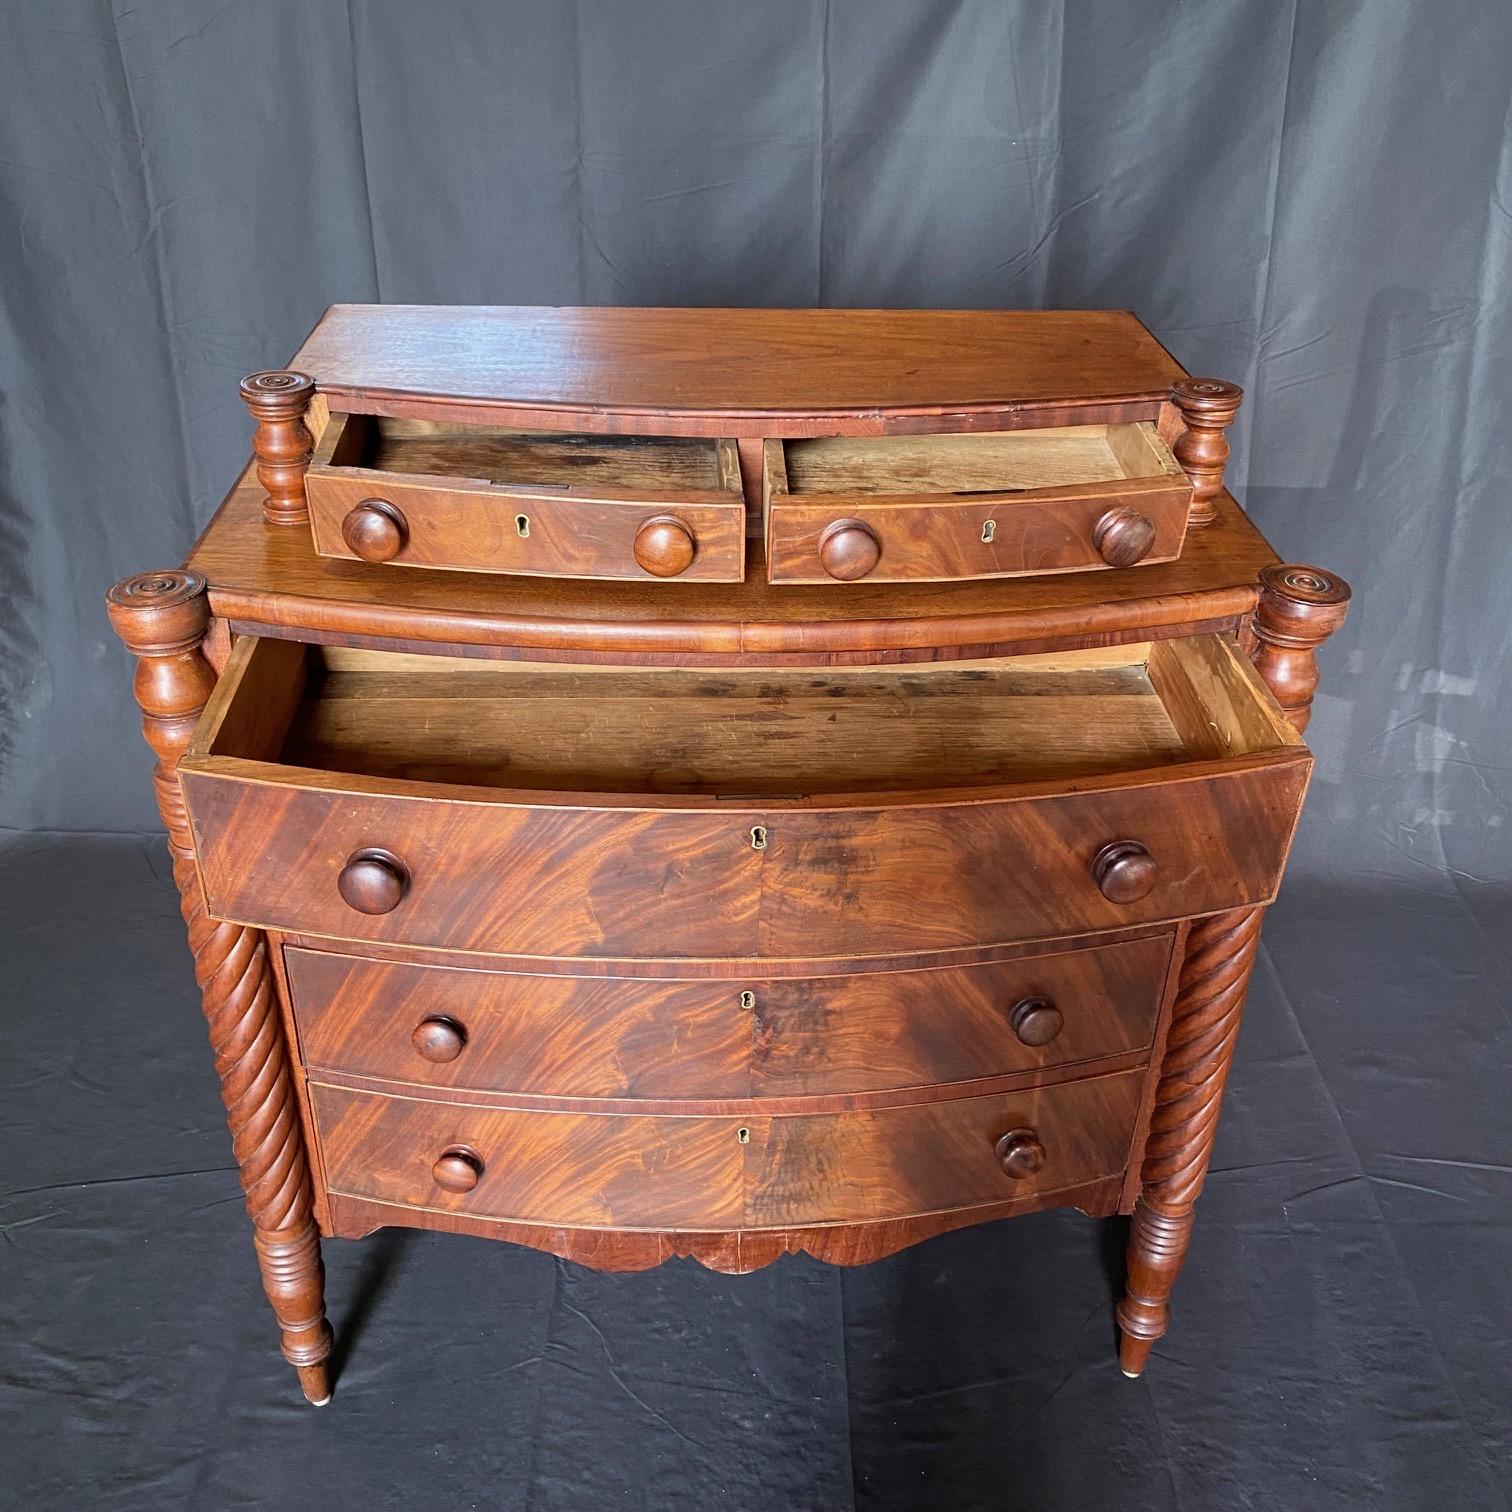  19th Century Sheraton Flame Mahogany Bow Front Chest having turret cookie cutter corners, flanked by fluted barley twist columns and onn turned legs.  There are two smaller setback drawers over four larger bowfront drawers on the chest, all fitted